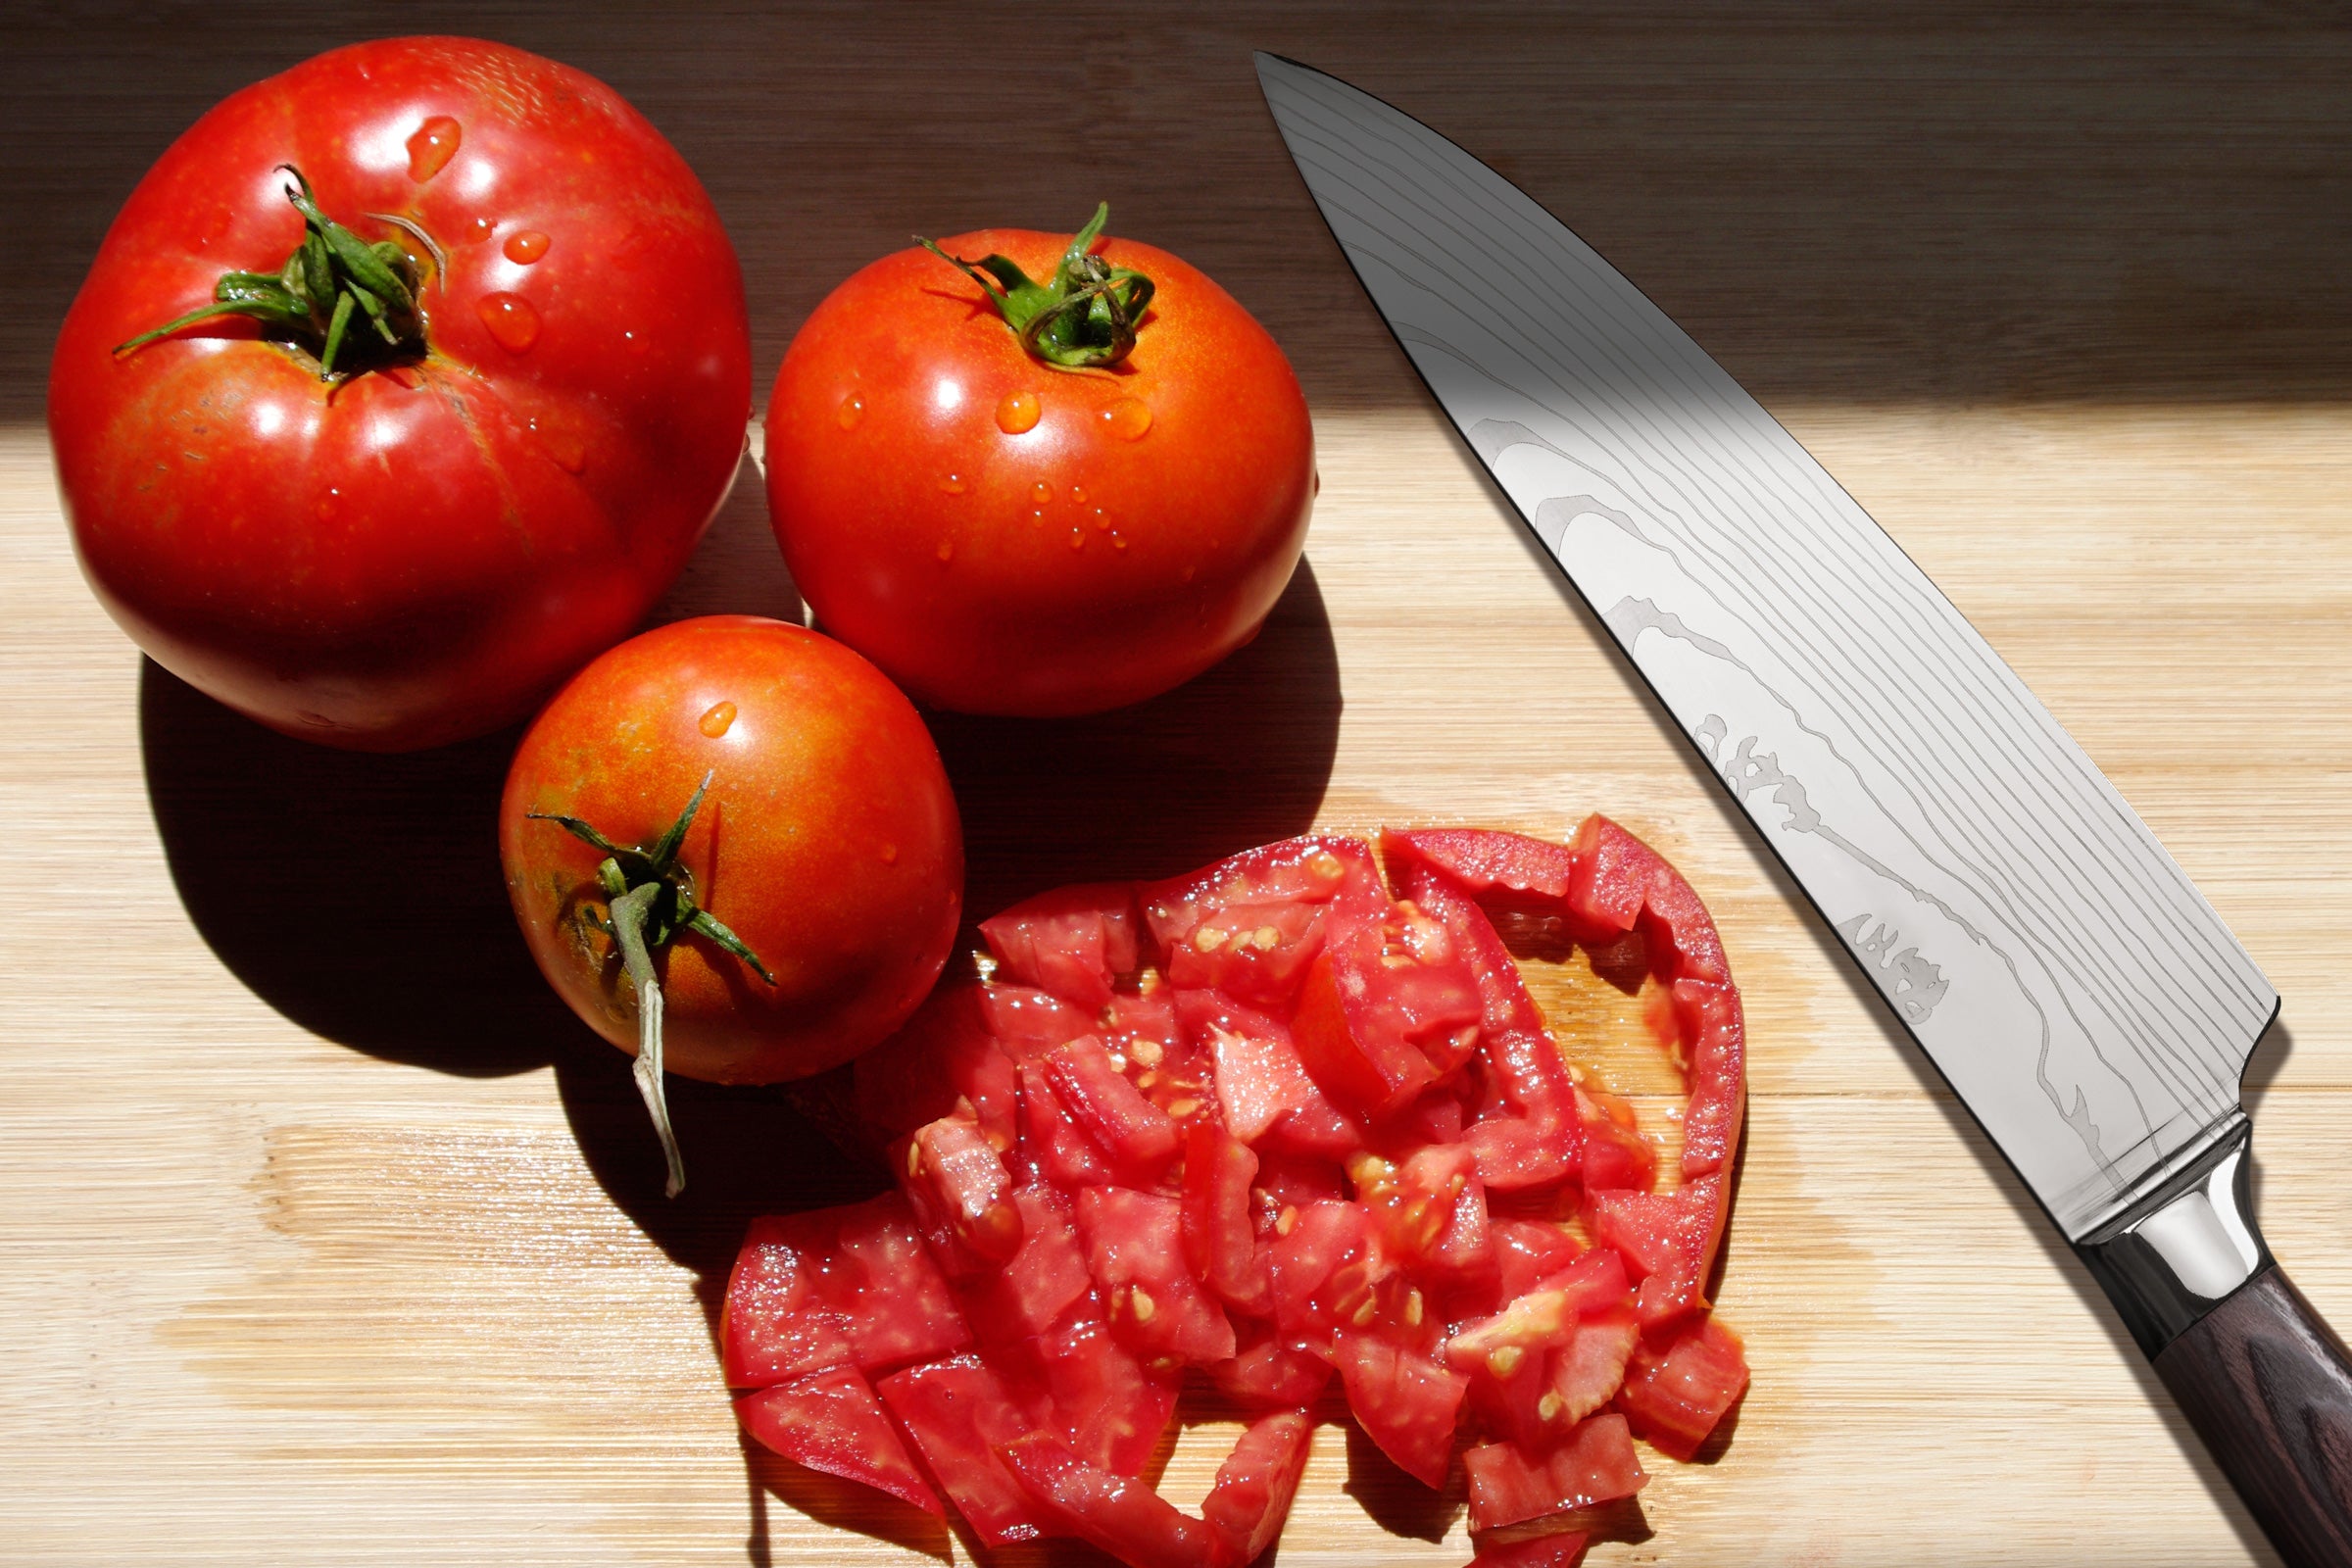 The Samurai Chef's Knife used to dice tomatoes.